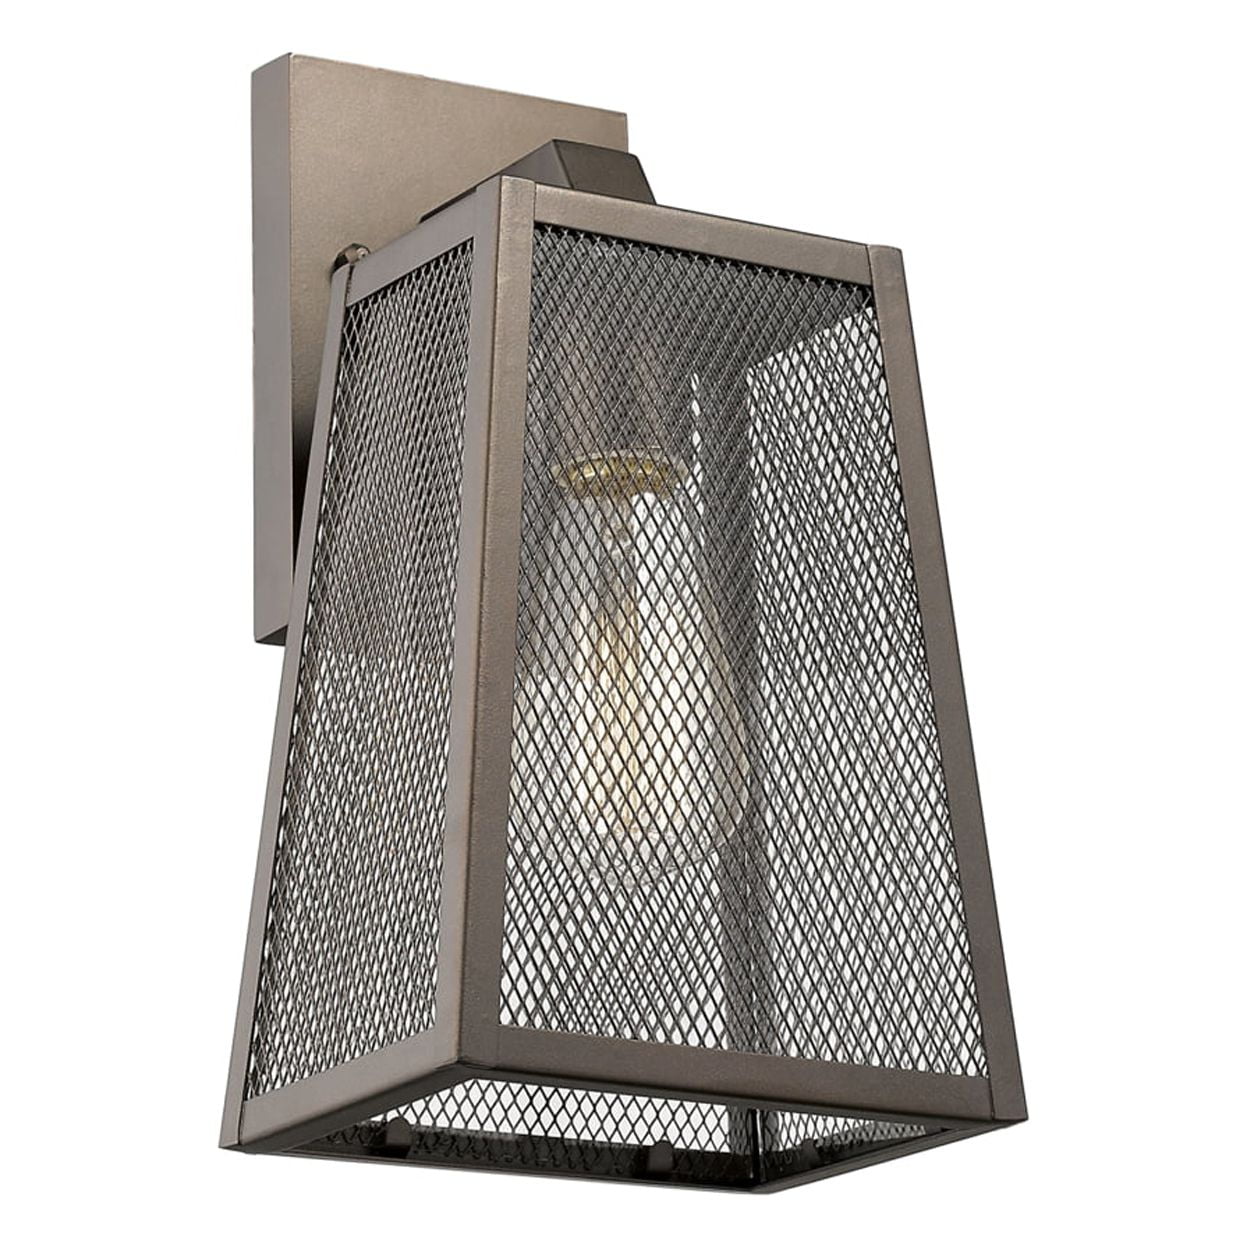 Picture of Chloe Lighting CH2D286RB12-OD1 Emerson Industrial 1 Light Rubbed Bronze Outdoor Wall Sconce - 12 in.